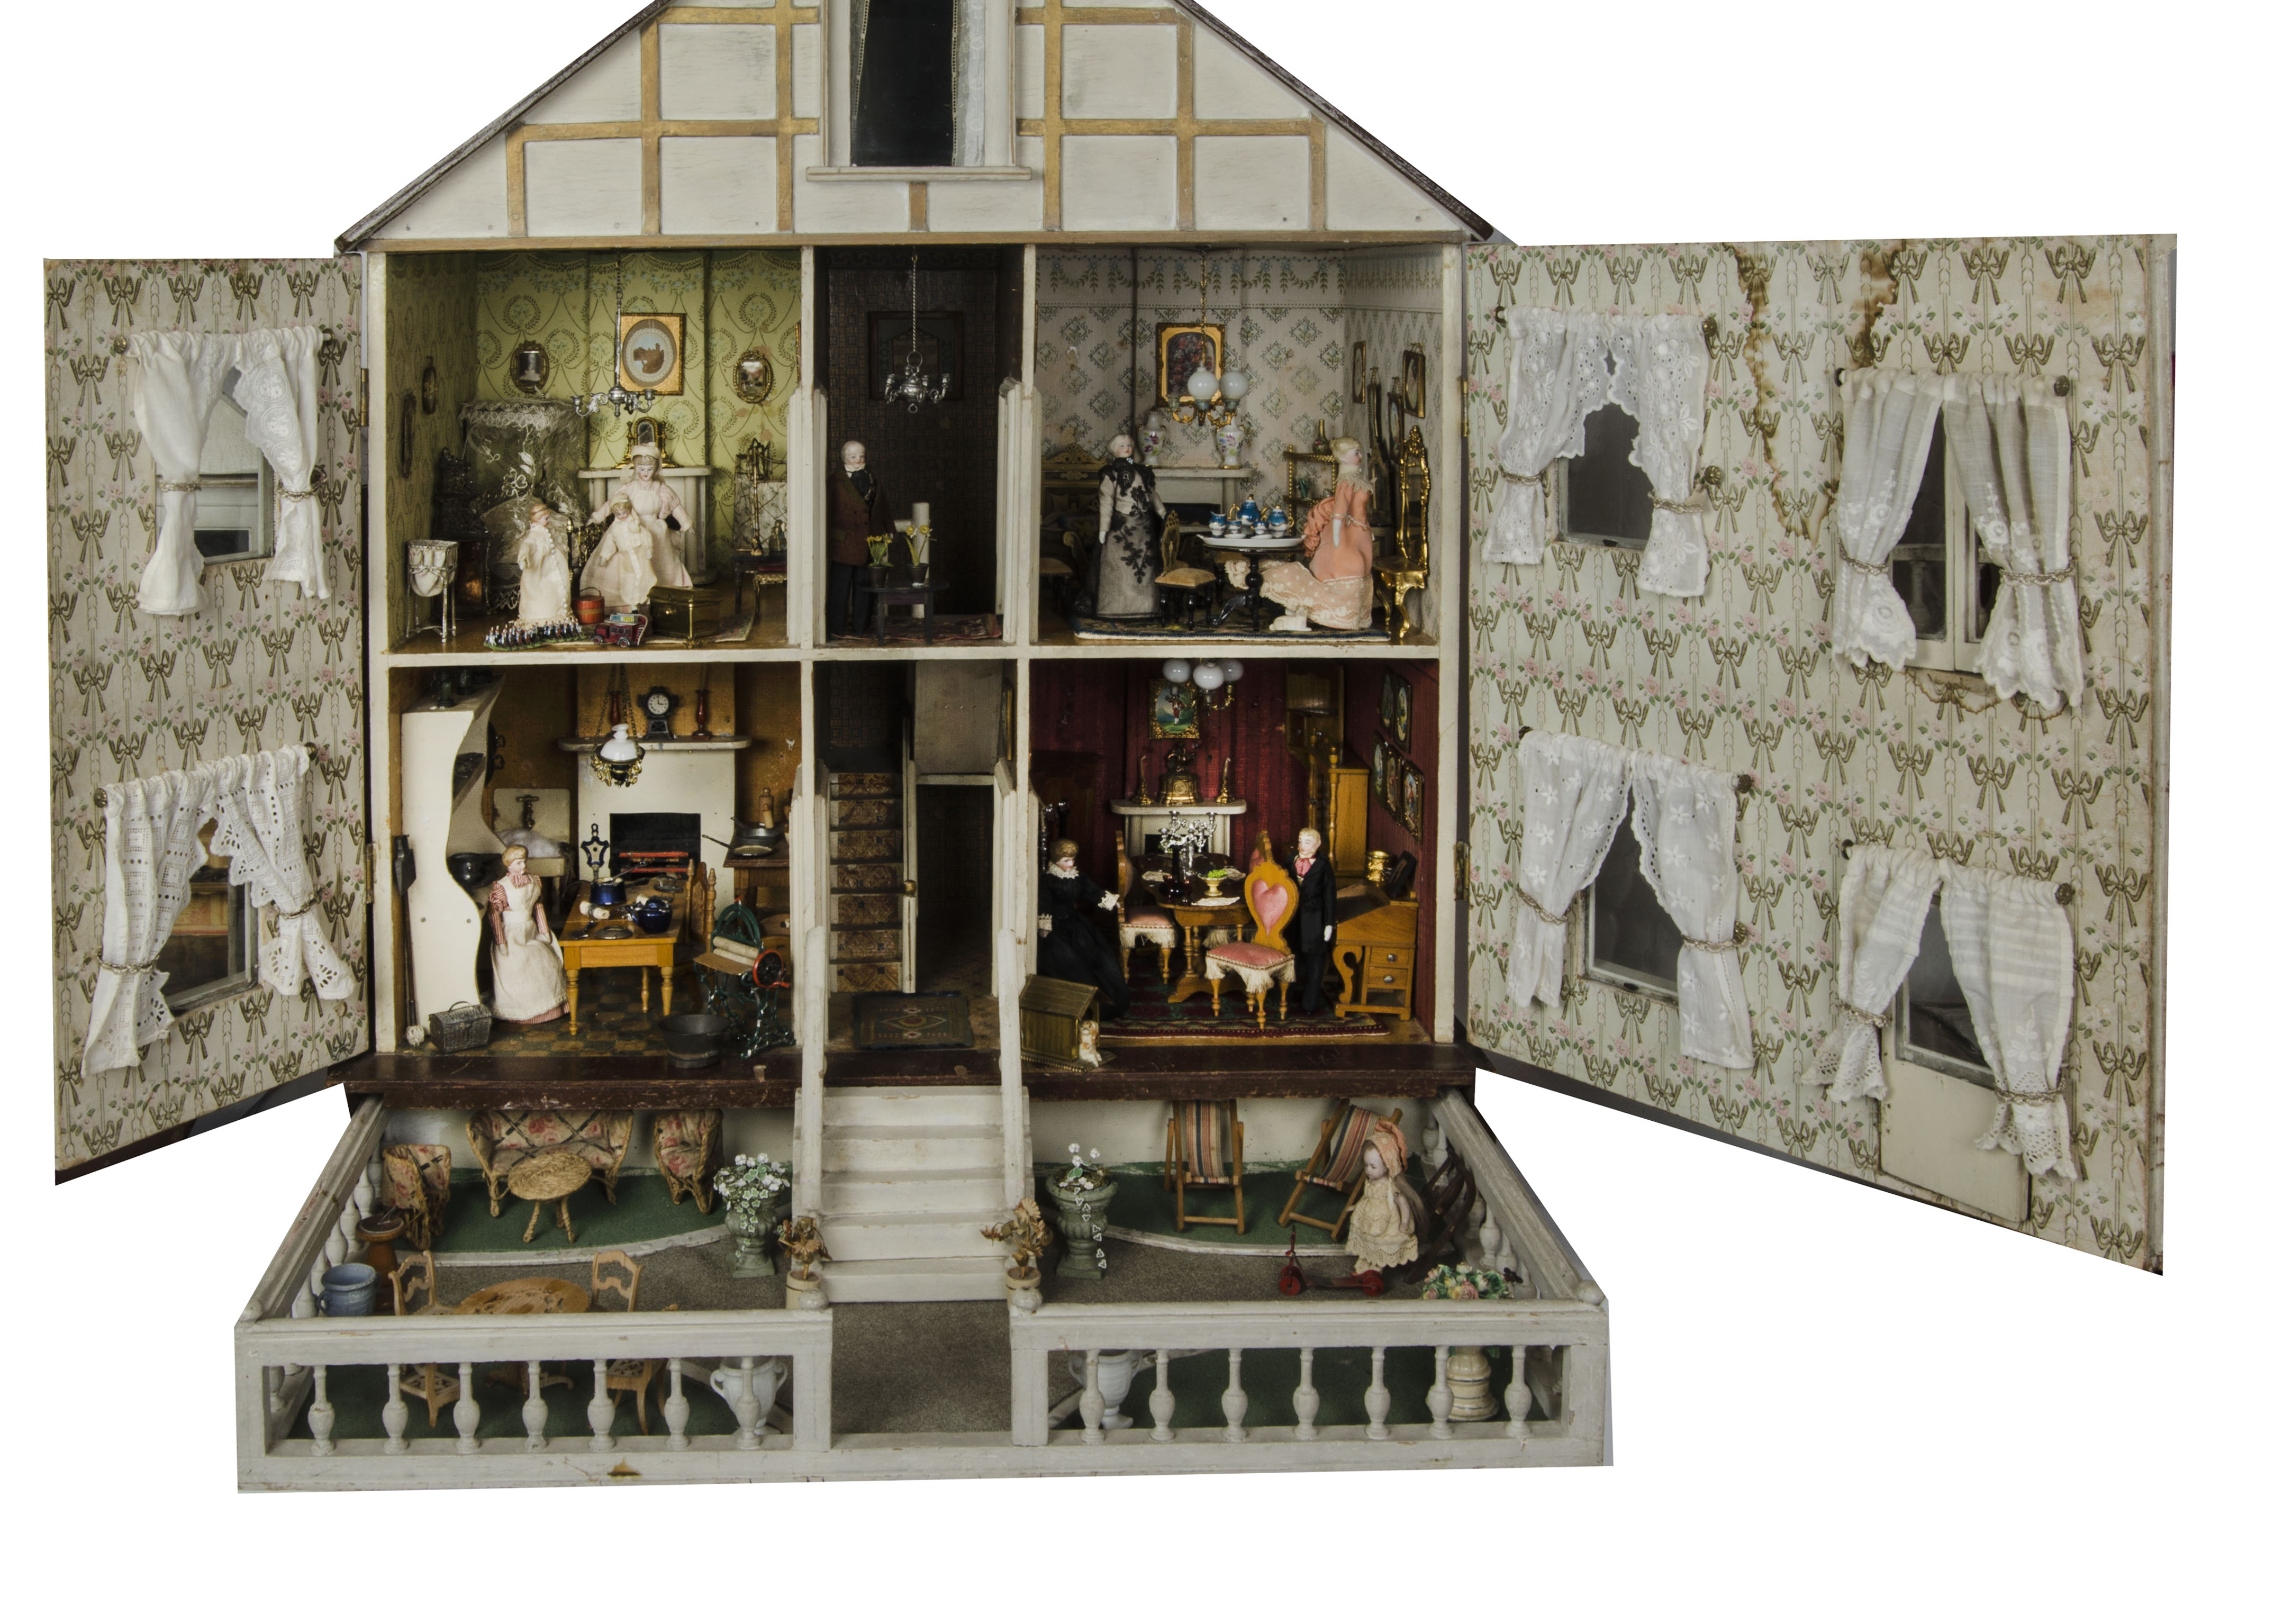 Penrhyn House, a large and unusual G & J Lines dolls’ house with coach house and pull-out garden,